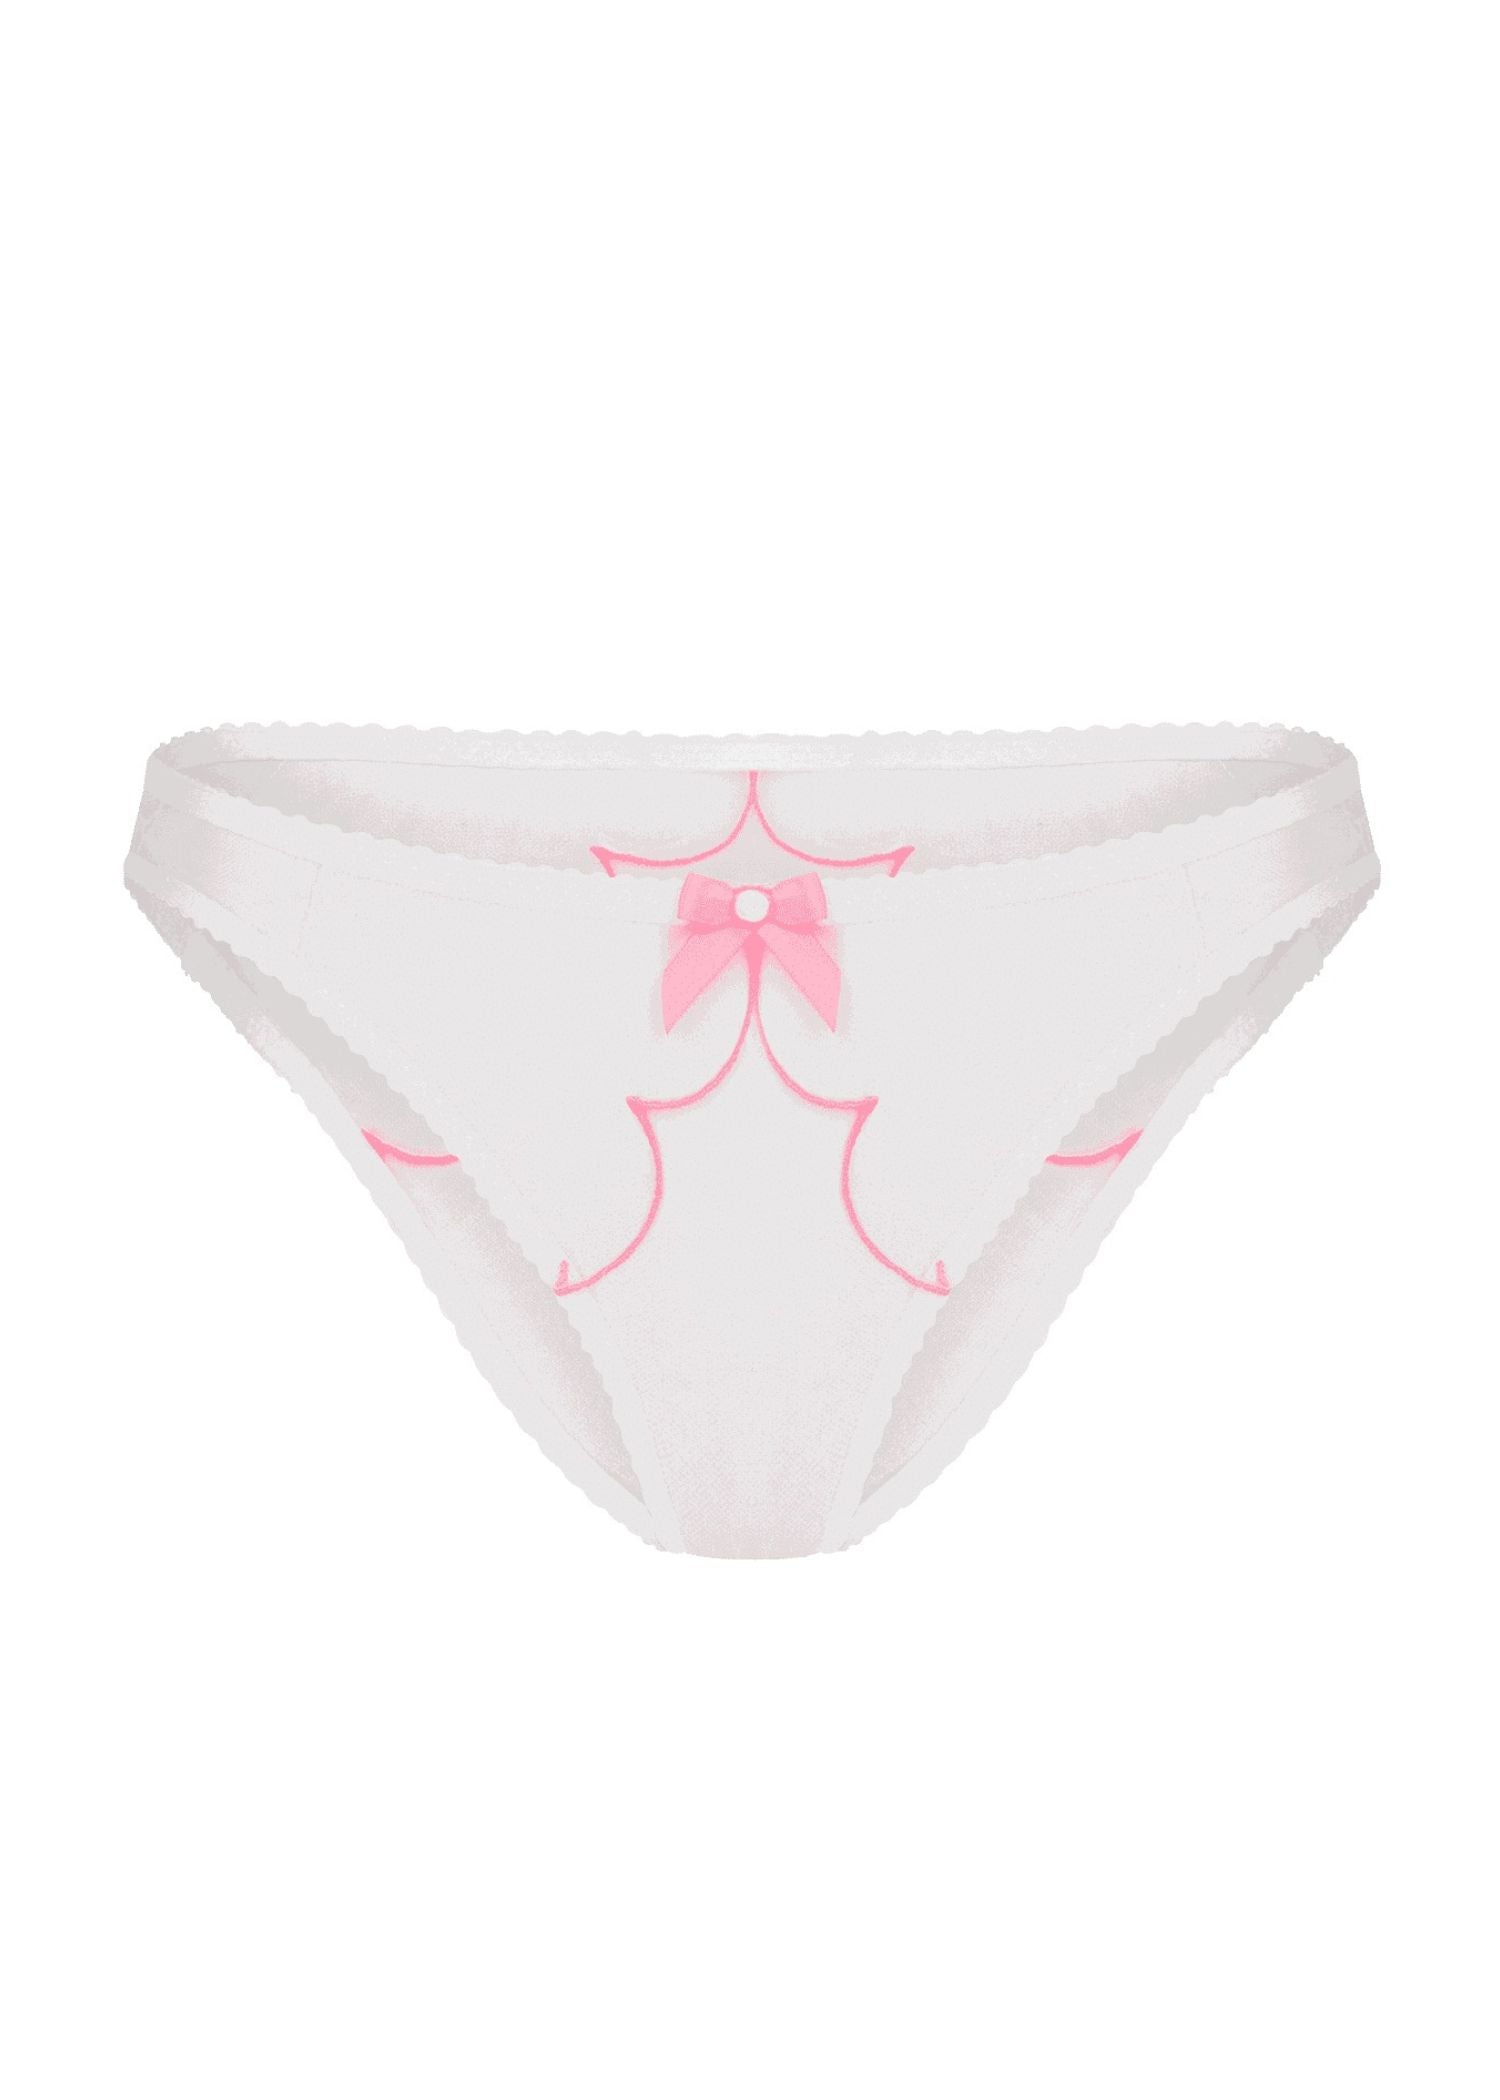 Agent Provocateur - Lorna Full Brief (White/Pink) | Avec Amour Luxury Lingerie